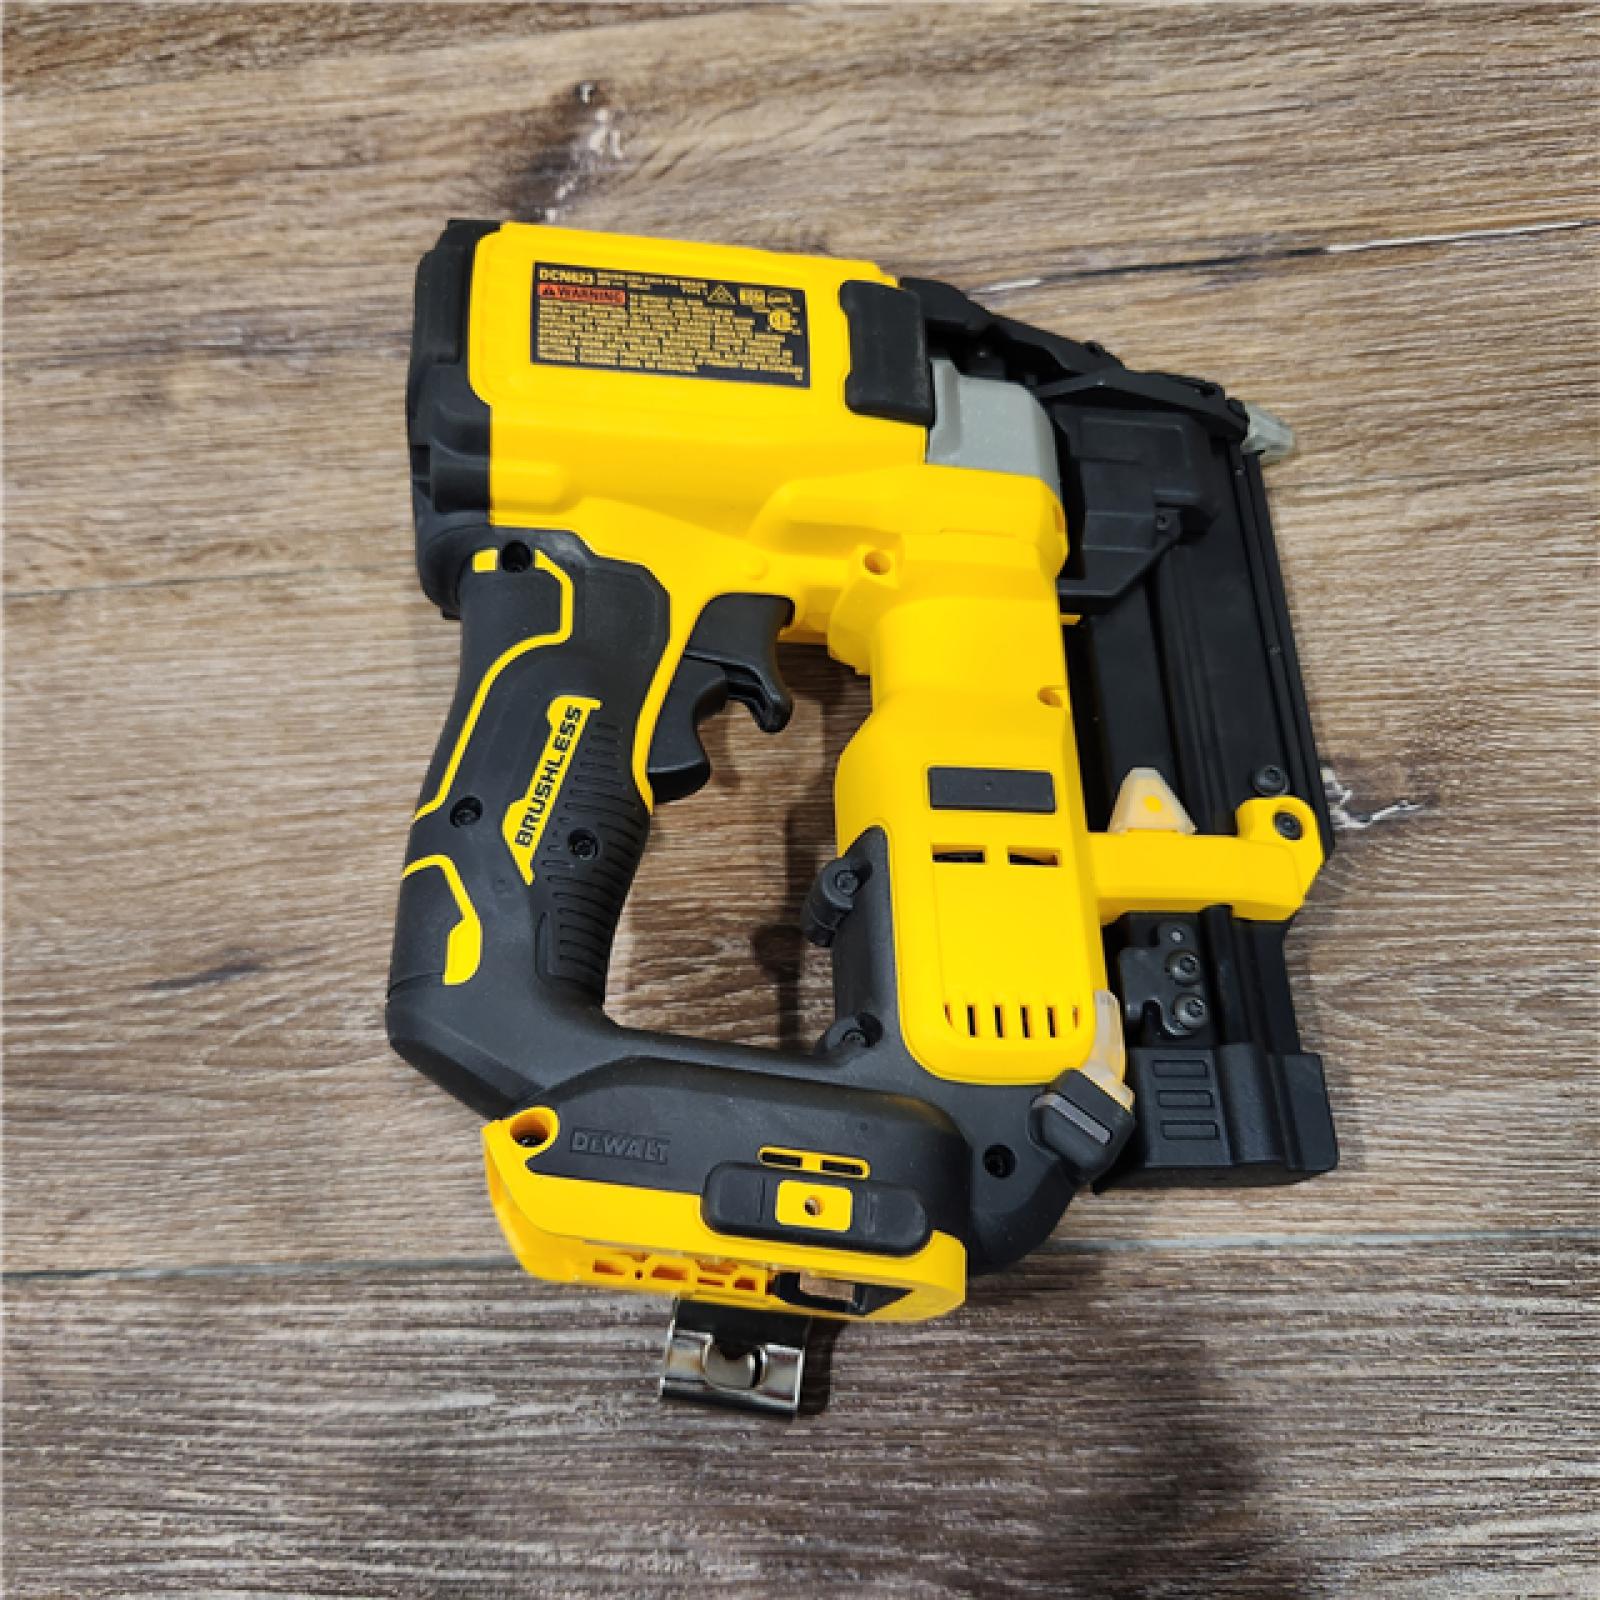 AS-IS DEWALT ATOMIC 20V MAX Lithium Ion Cordless 23 Gauge Pin Nailer Kit with 2.0Ah Battery and Charger (DCN623D1)